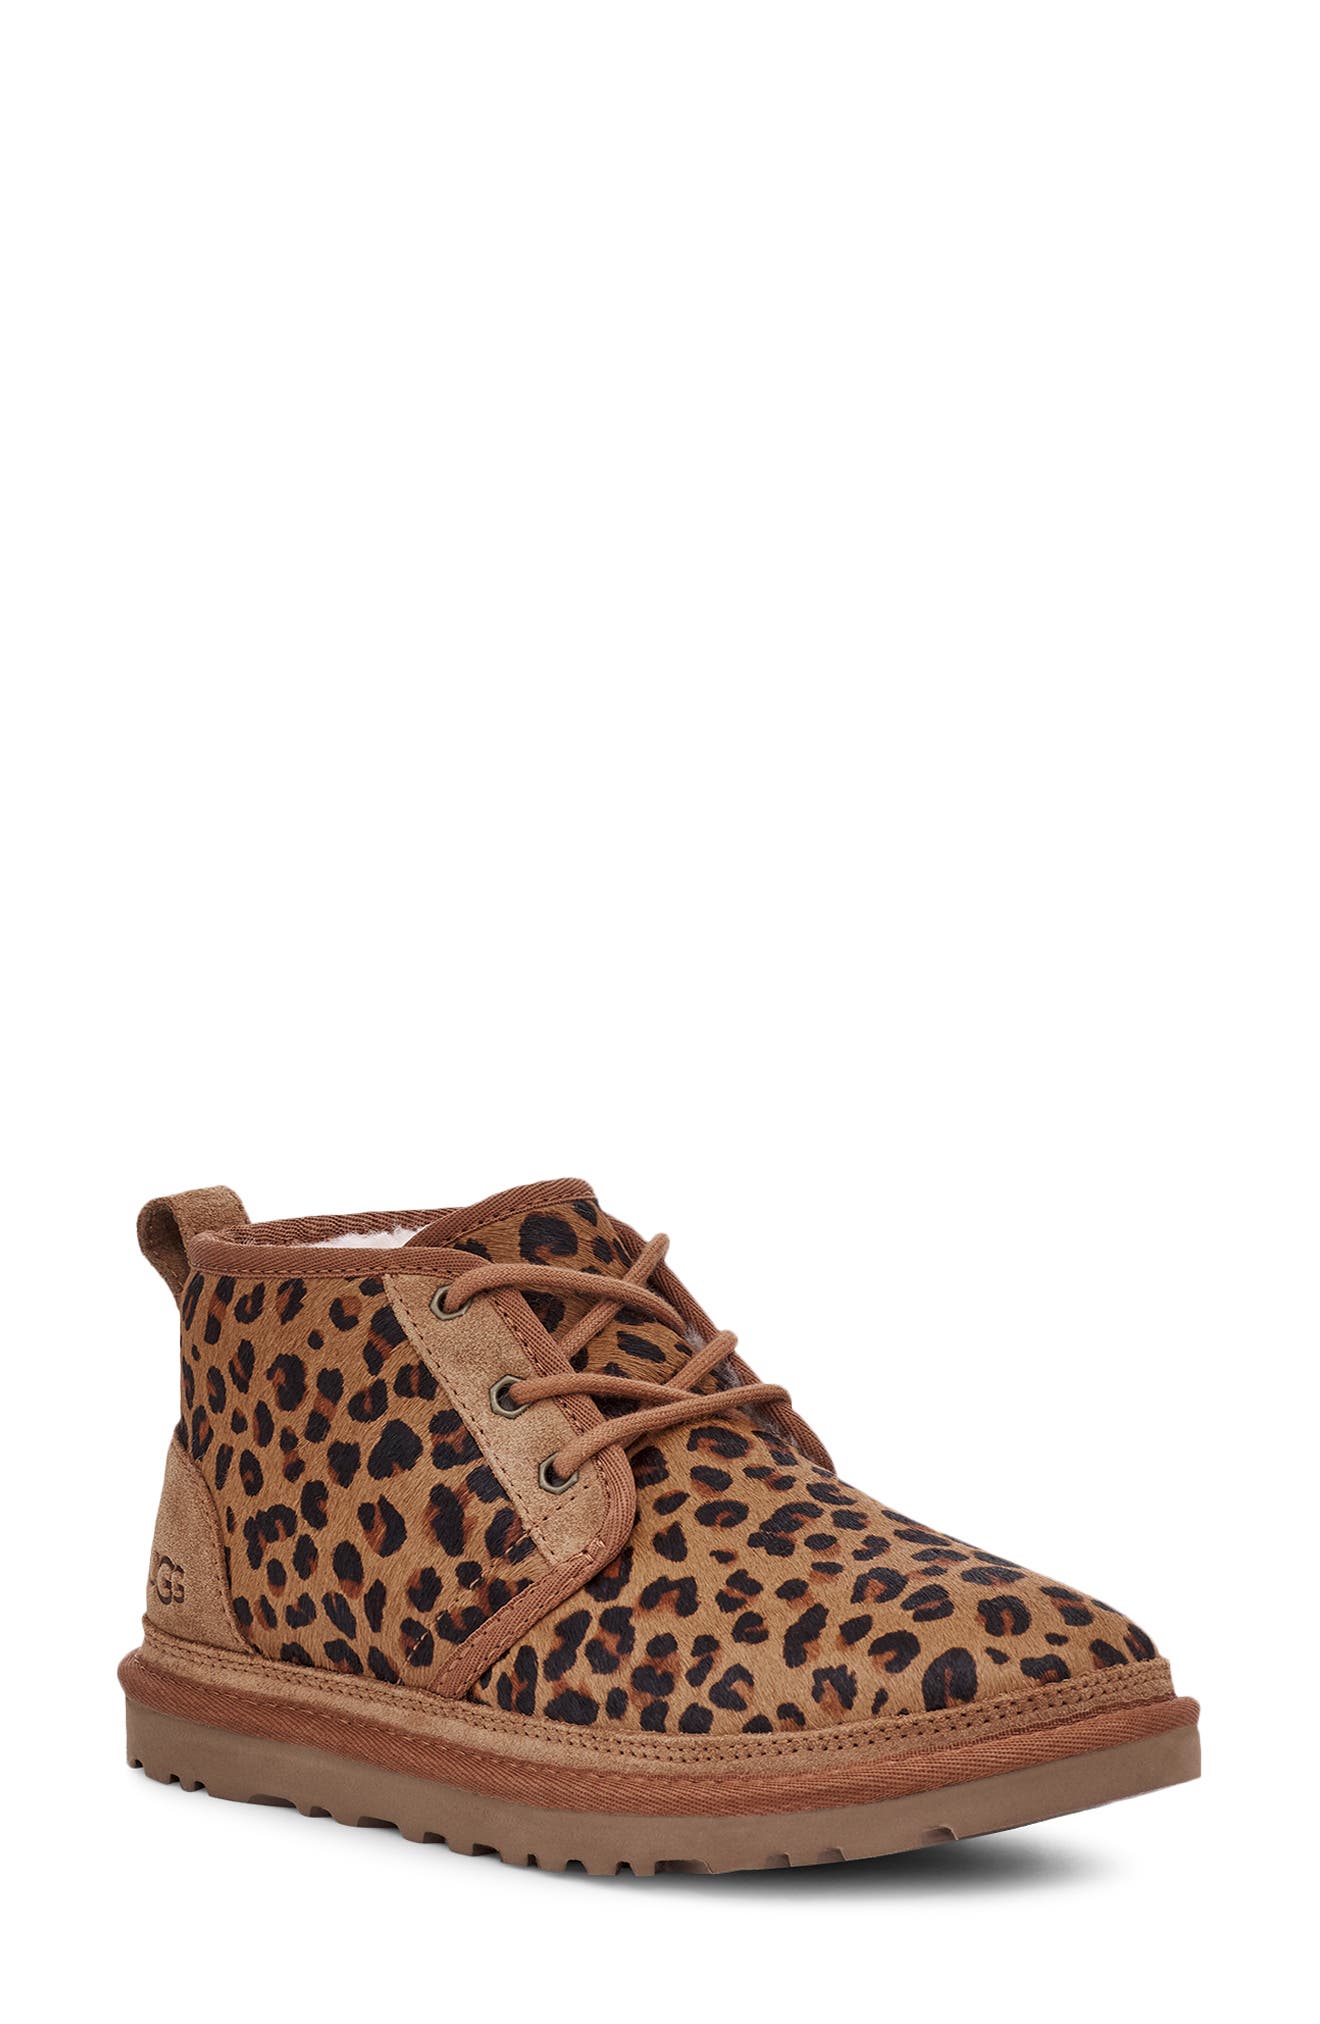 Ugg Neumel Faux Fur Lined Chukka Boot In Leopard Print Suede